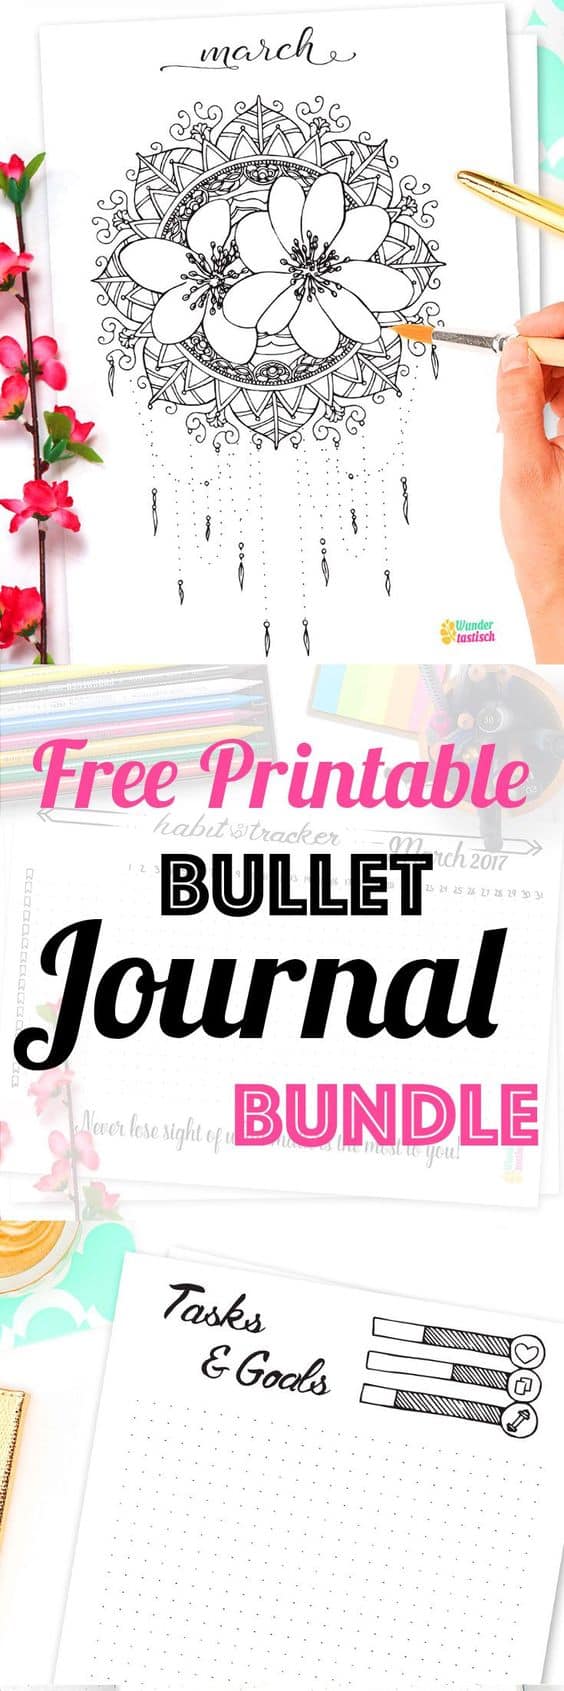 15 Creative Bullet Journal Printables for When You Don't Have Time to Be